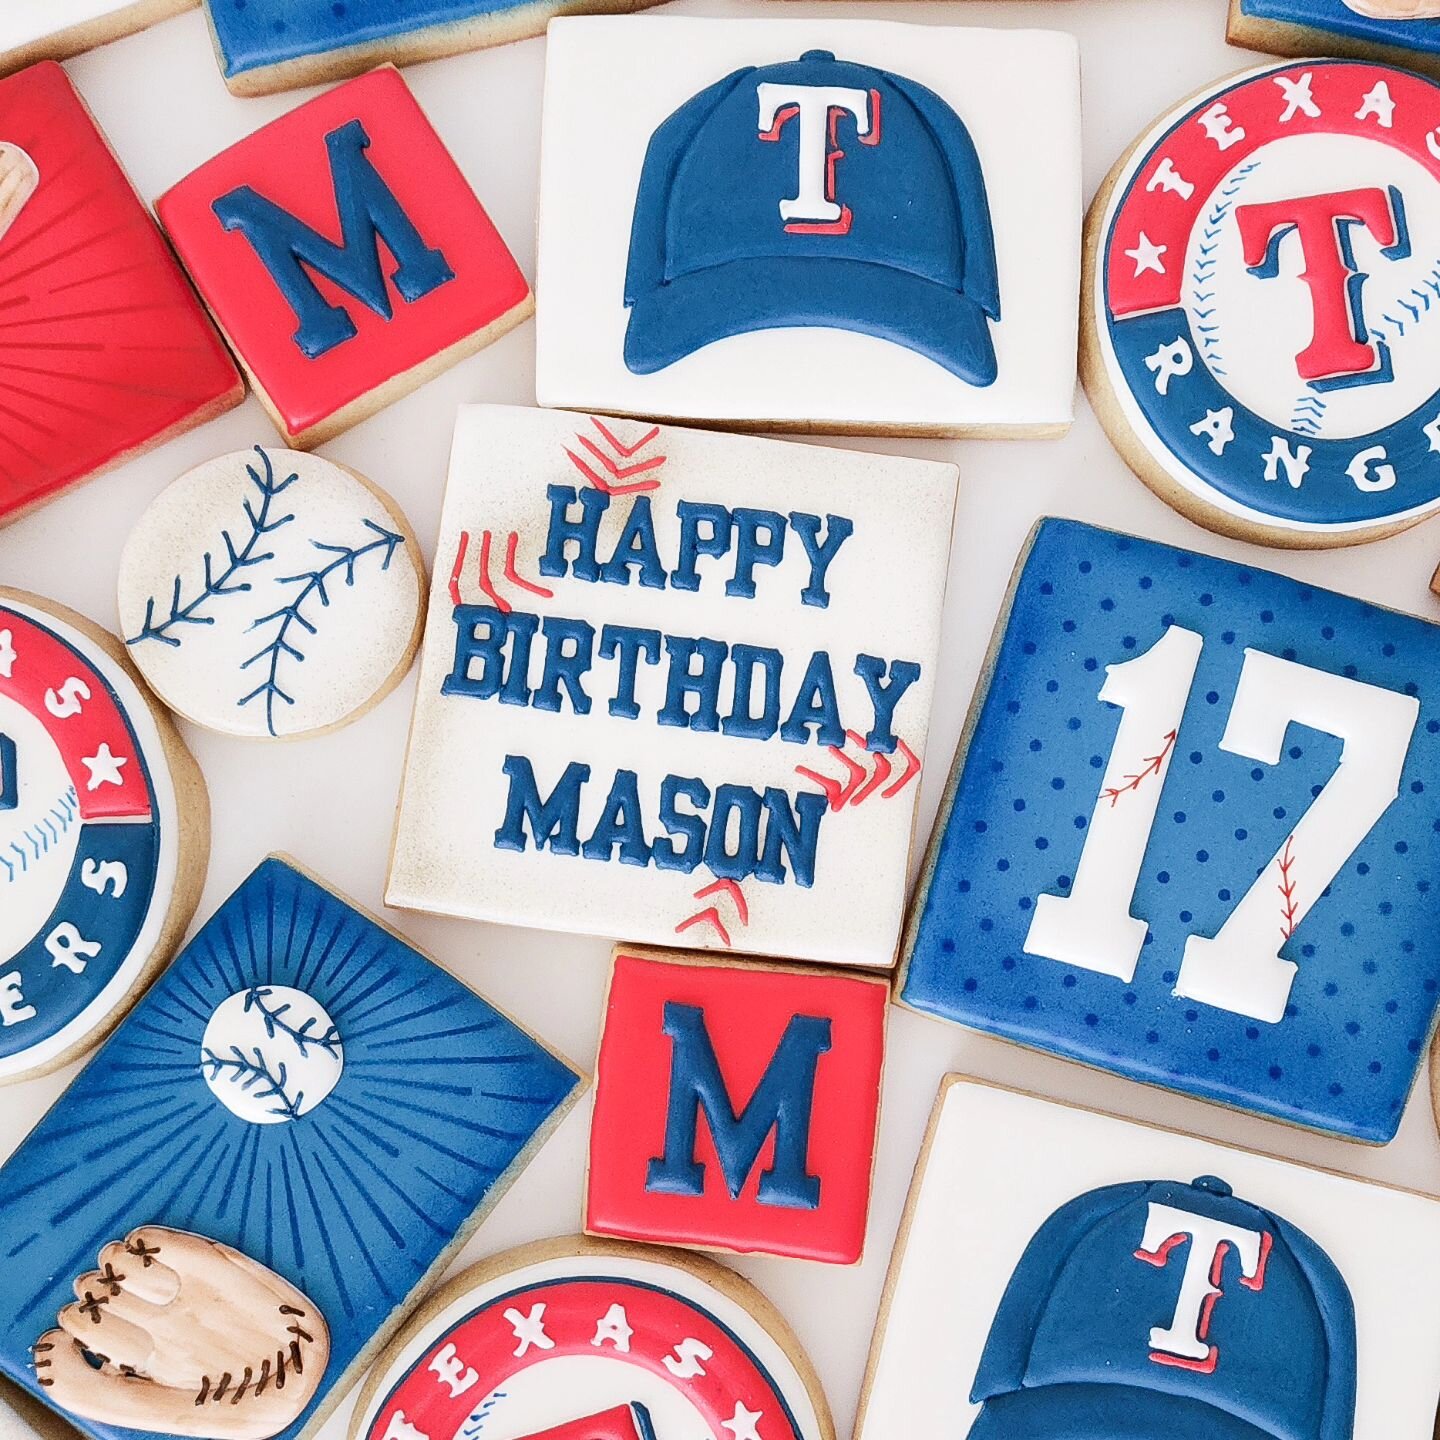 I here it's opening day! Mason, I hope you had a great birthday and good luck to your favorite team!!
.
.
.
.
.
.
.
#openingday#happybirthday#texasrangersfan#takemeouttotheballgame#worldseries#grotonct#ledyardct#celebrateallthethings#mysticct#newlond